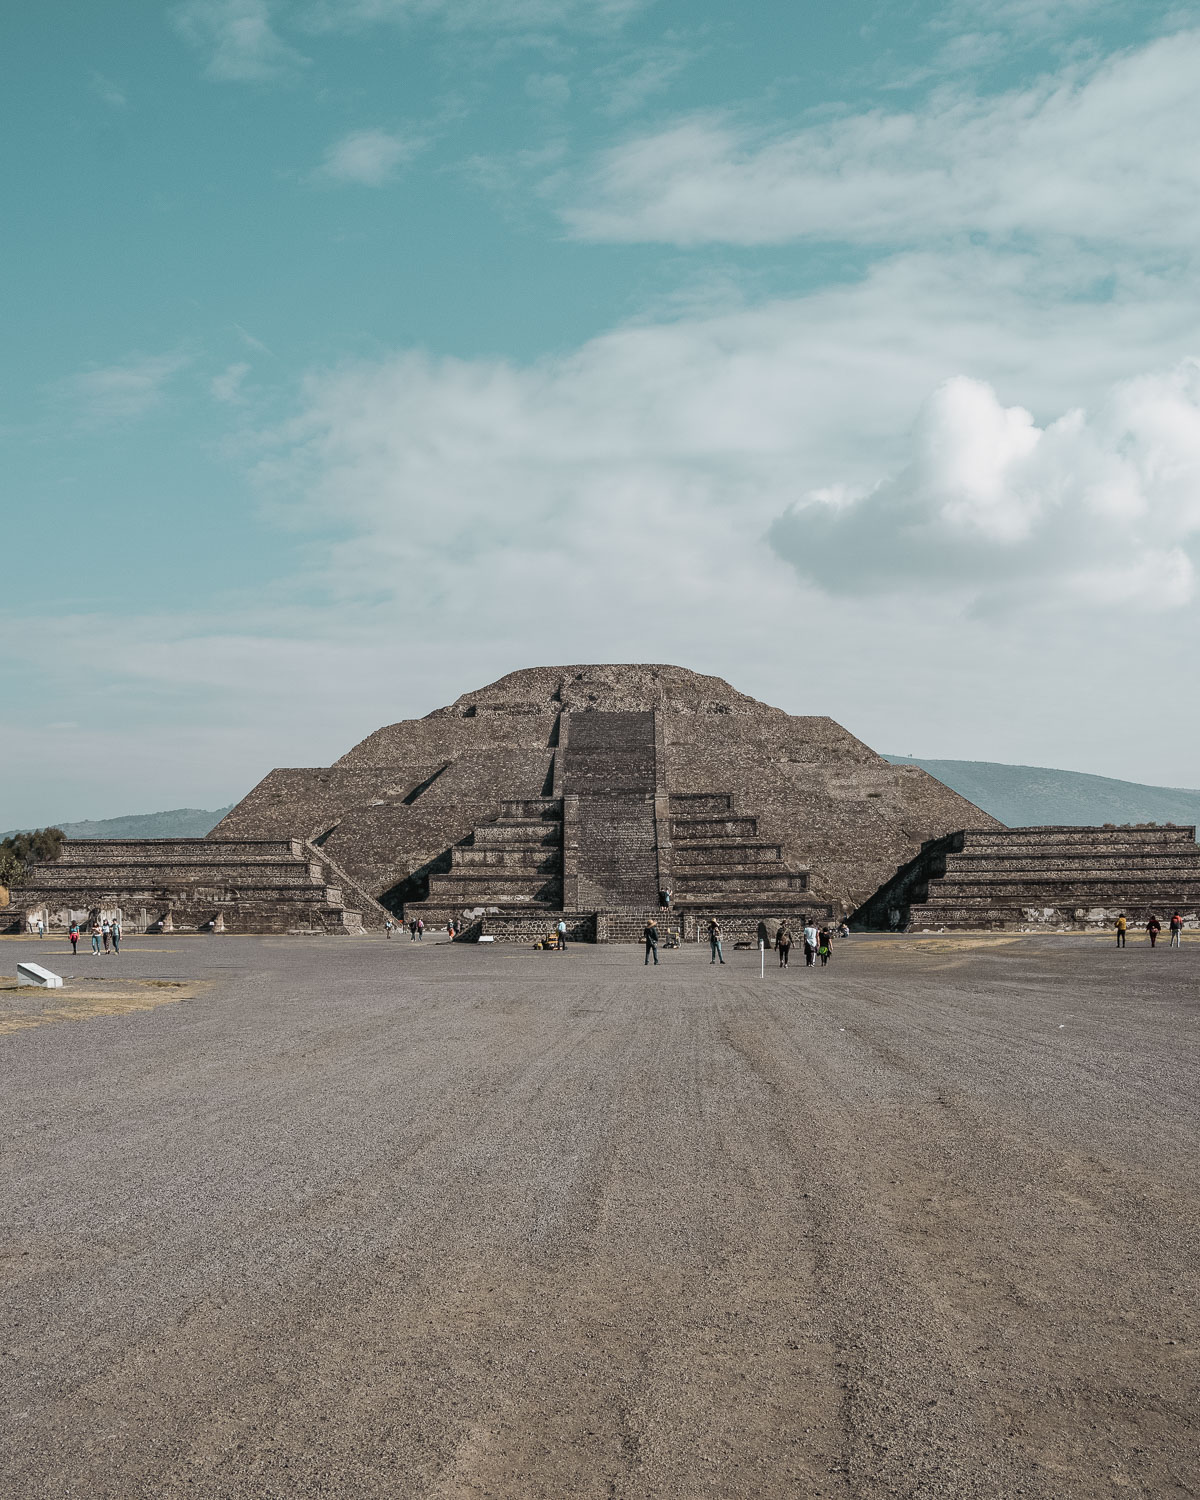 The archaeological site of Teotihuacan, an unmissable site in the history of Mexico City